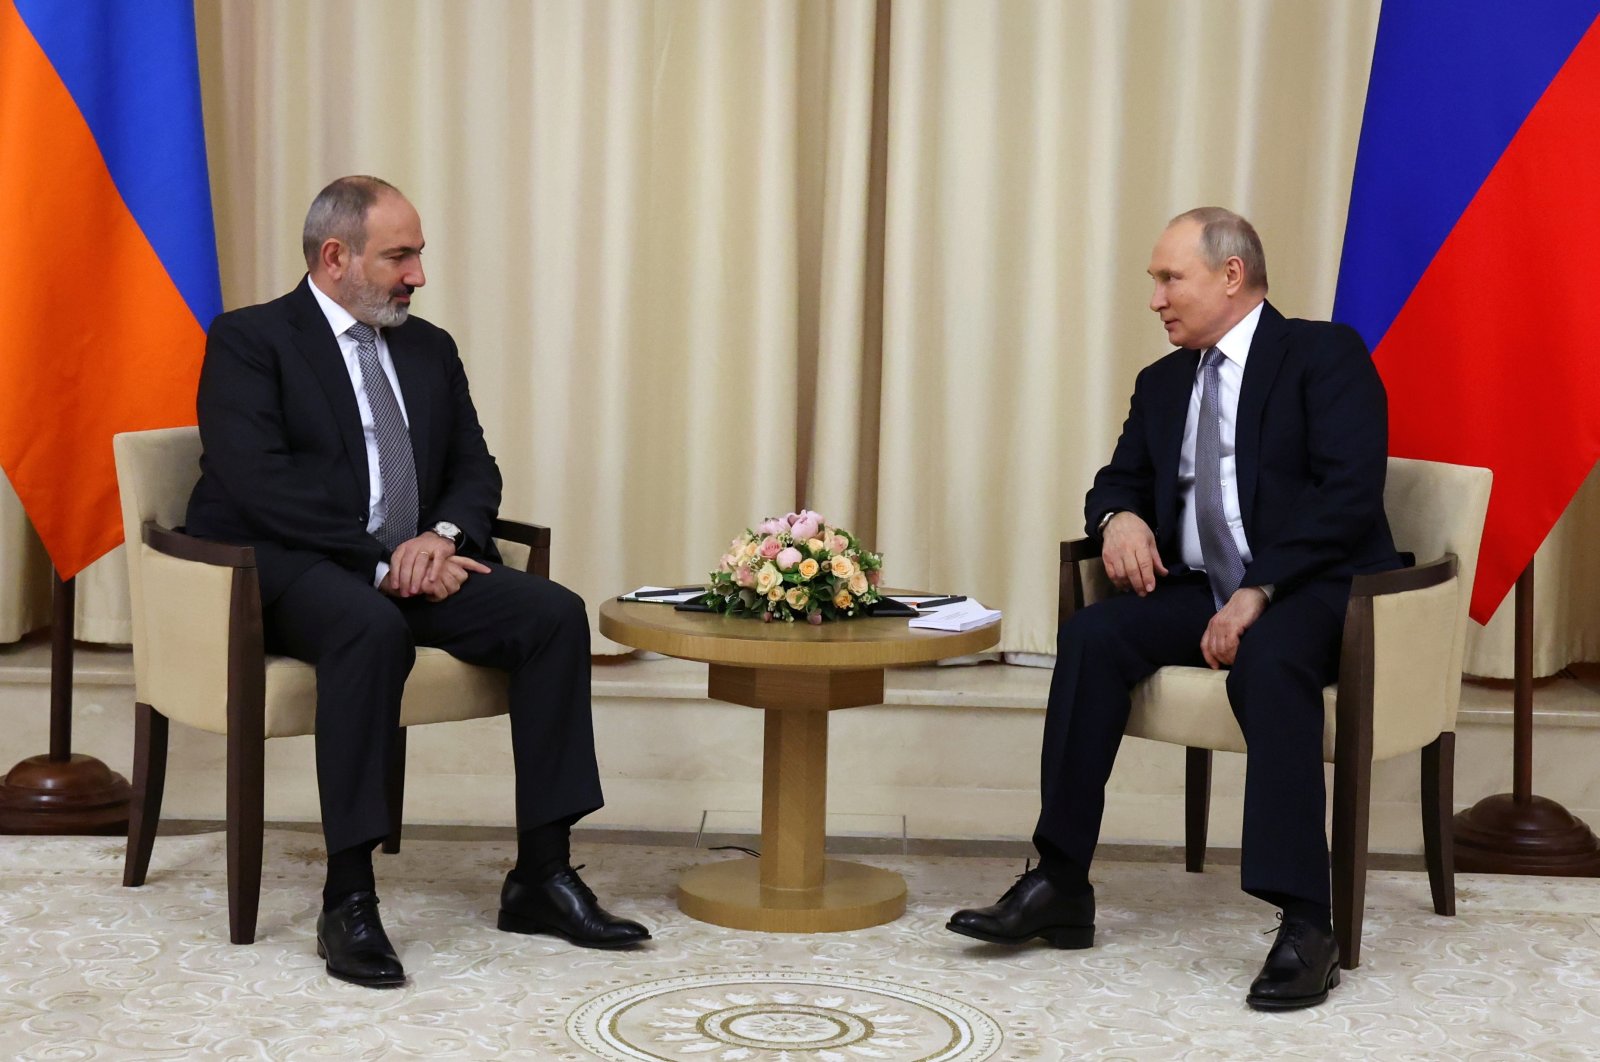 Armenian Prime Minister Nikol Pashinian (L) attends a meeting with Russian President Vladimir Putin at the Novo-Ogaryovo state residence outside Moscow, Russia, April 19, 2022. (Sputnik via Reuters)